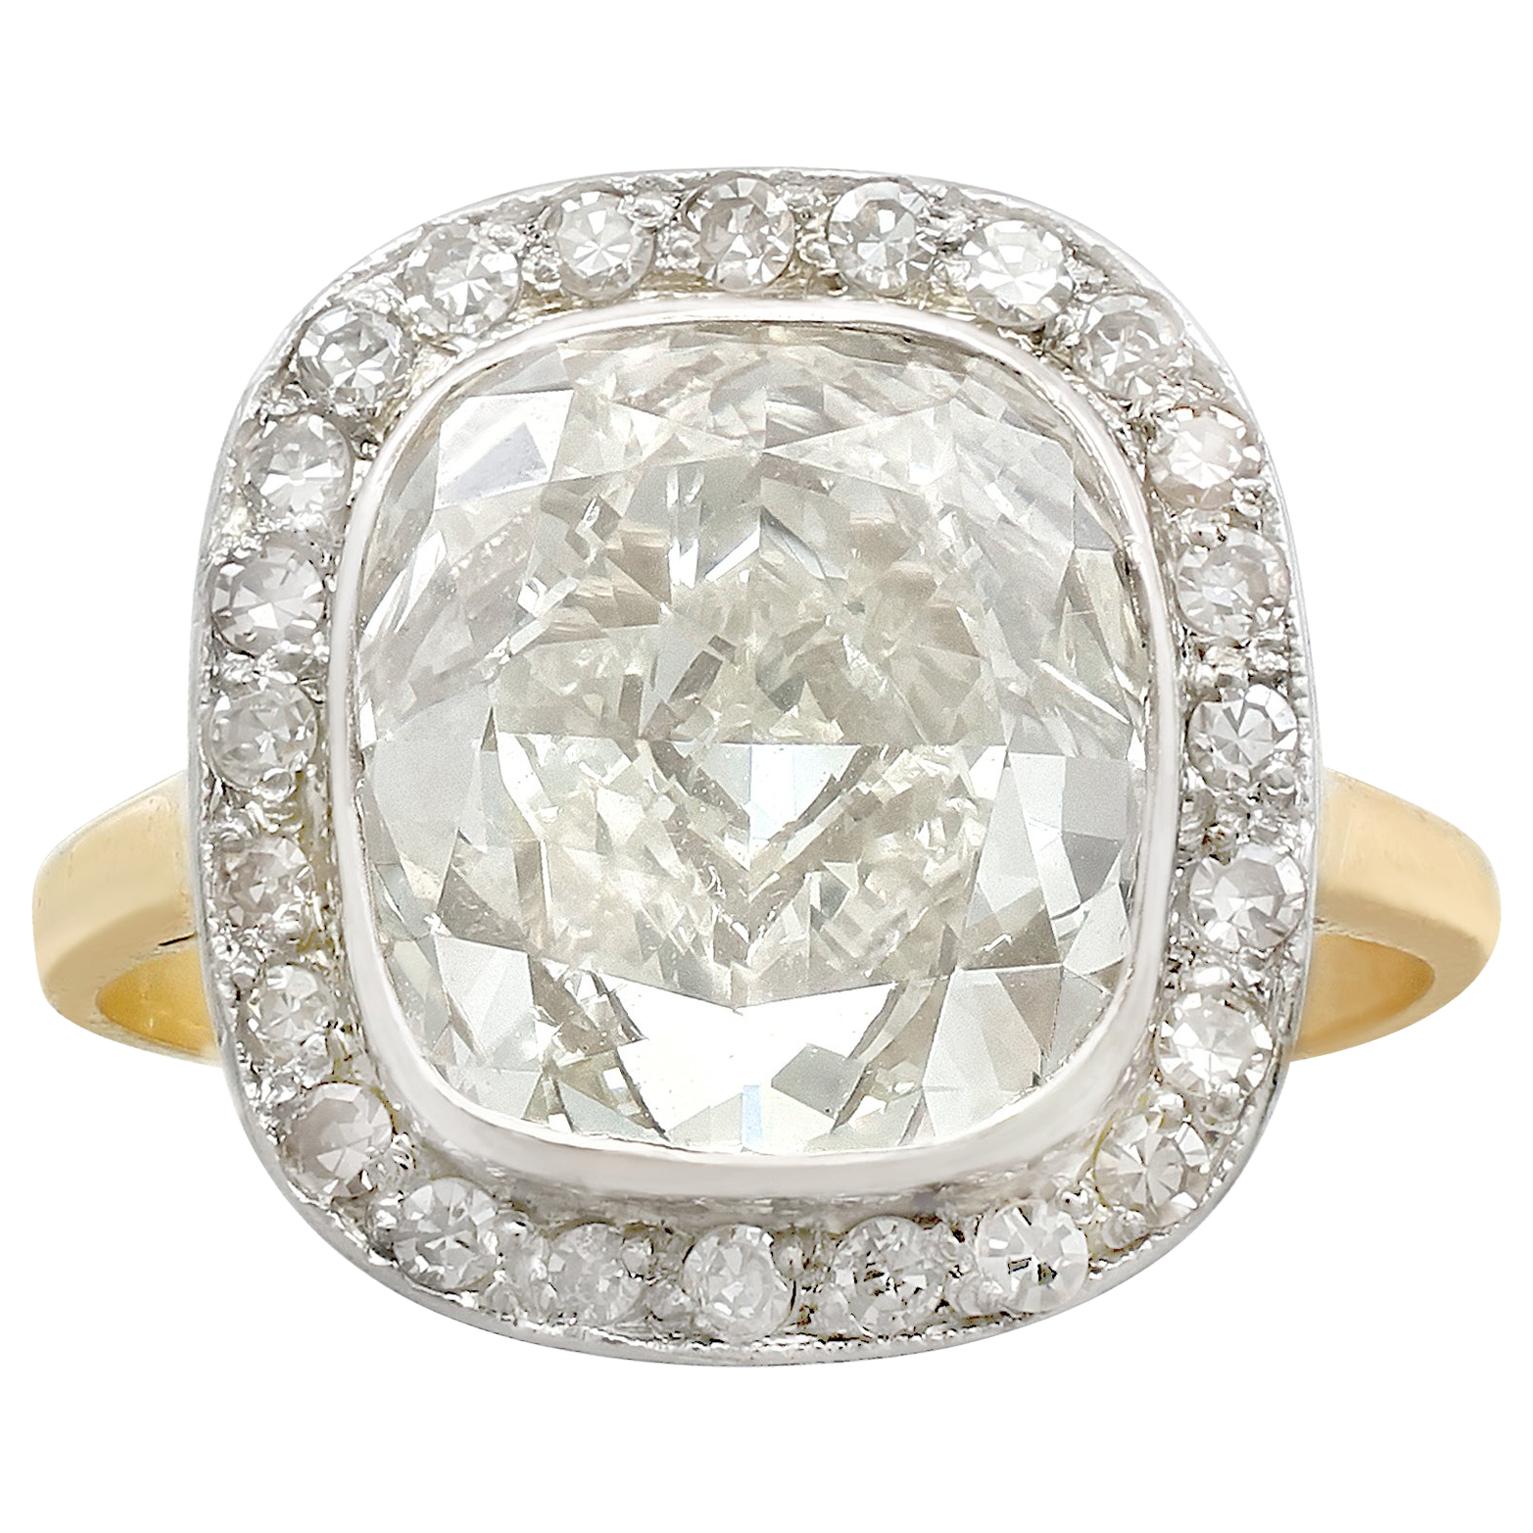 A stunning antique and vintage 5.73 carat diamond and 18 carat yellow gold, 10 carat white gold set engagement ring; part of our diverse diamond jewellery and estate jewelry collections.

This stunning, fine and impressive antique diamond halo ring